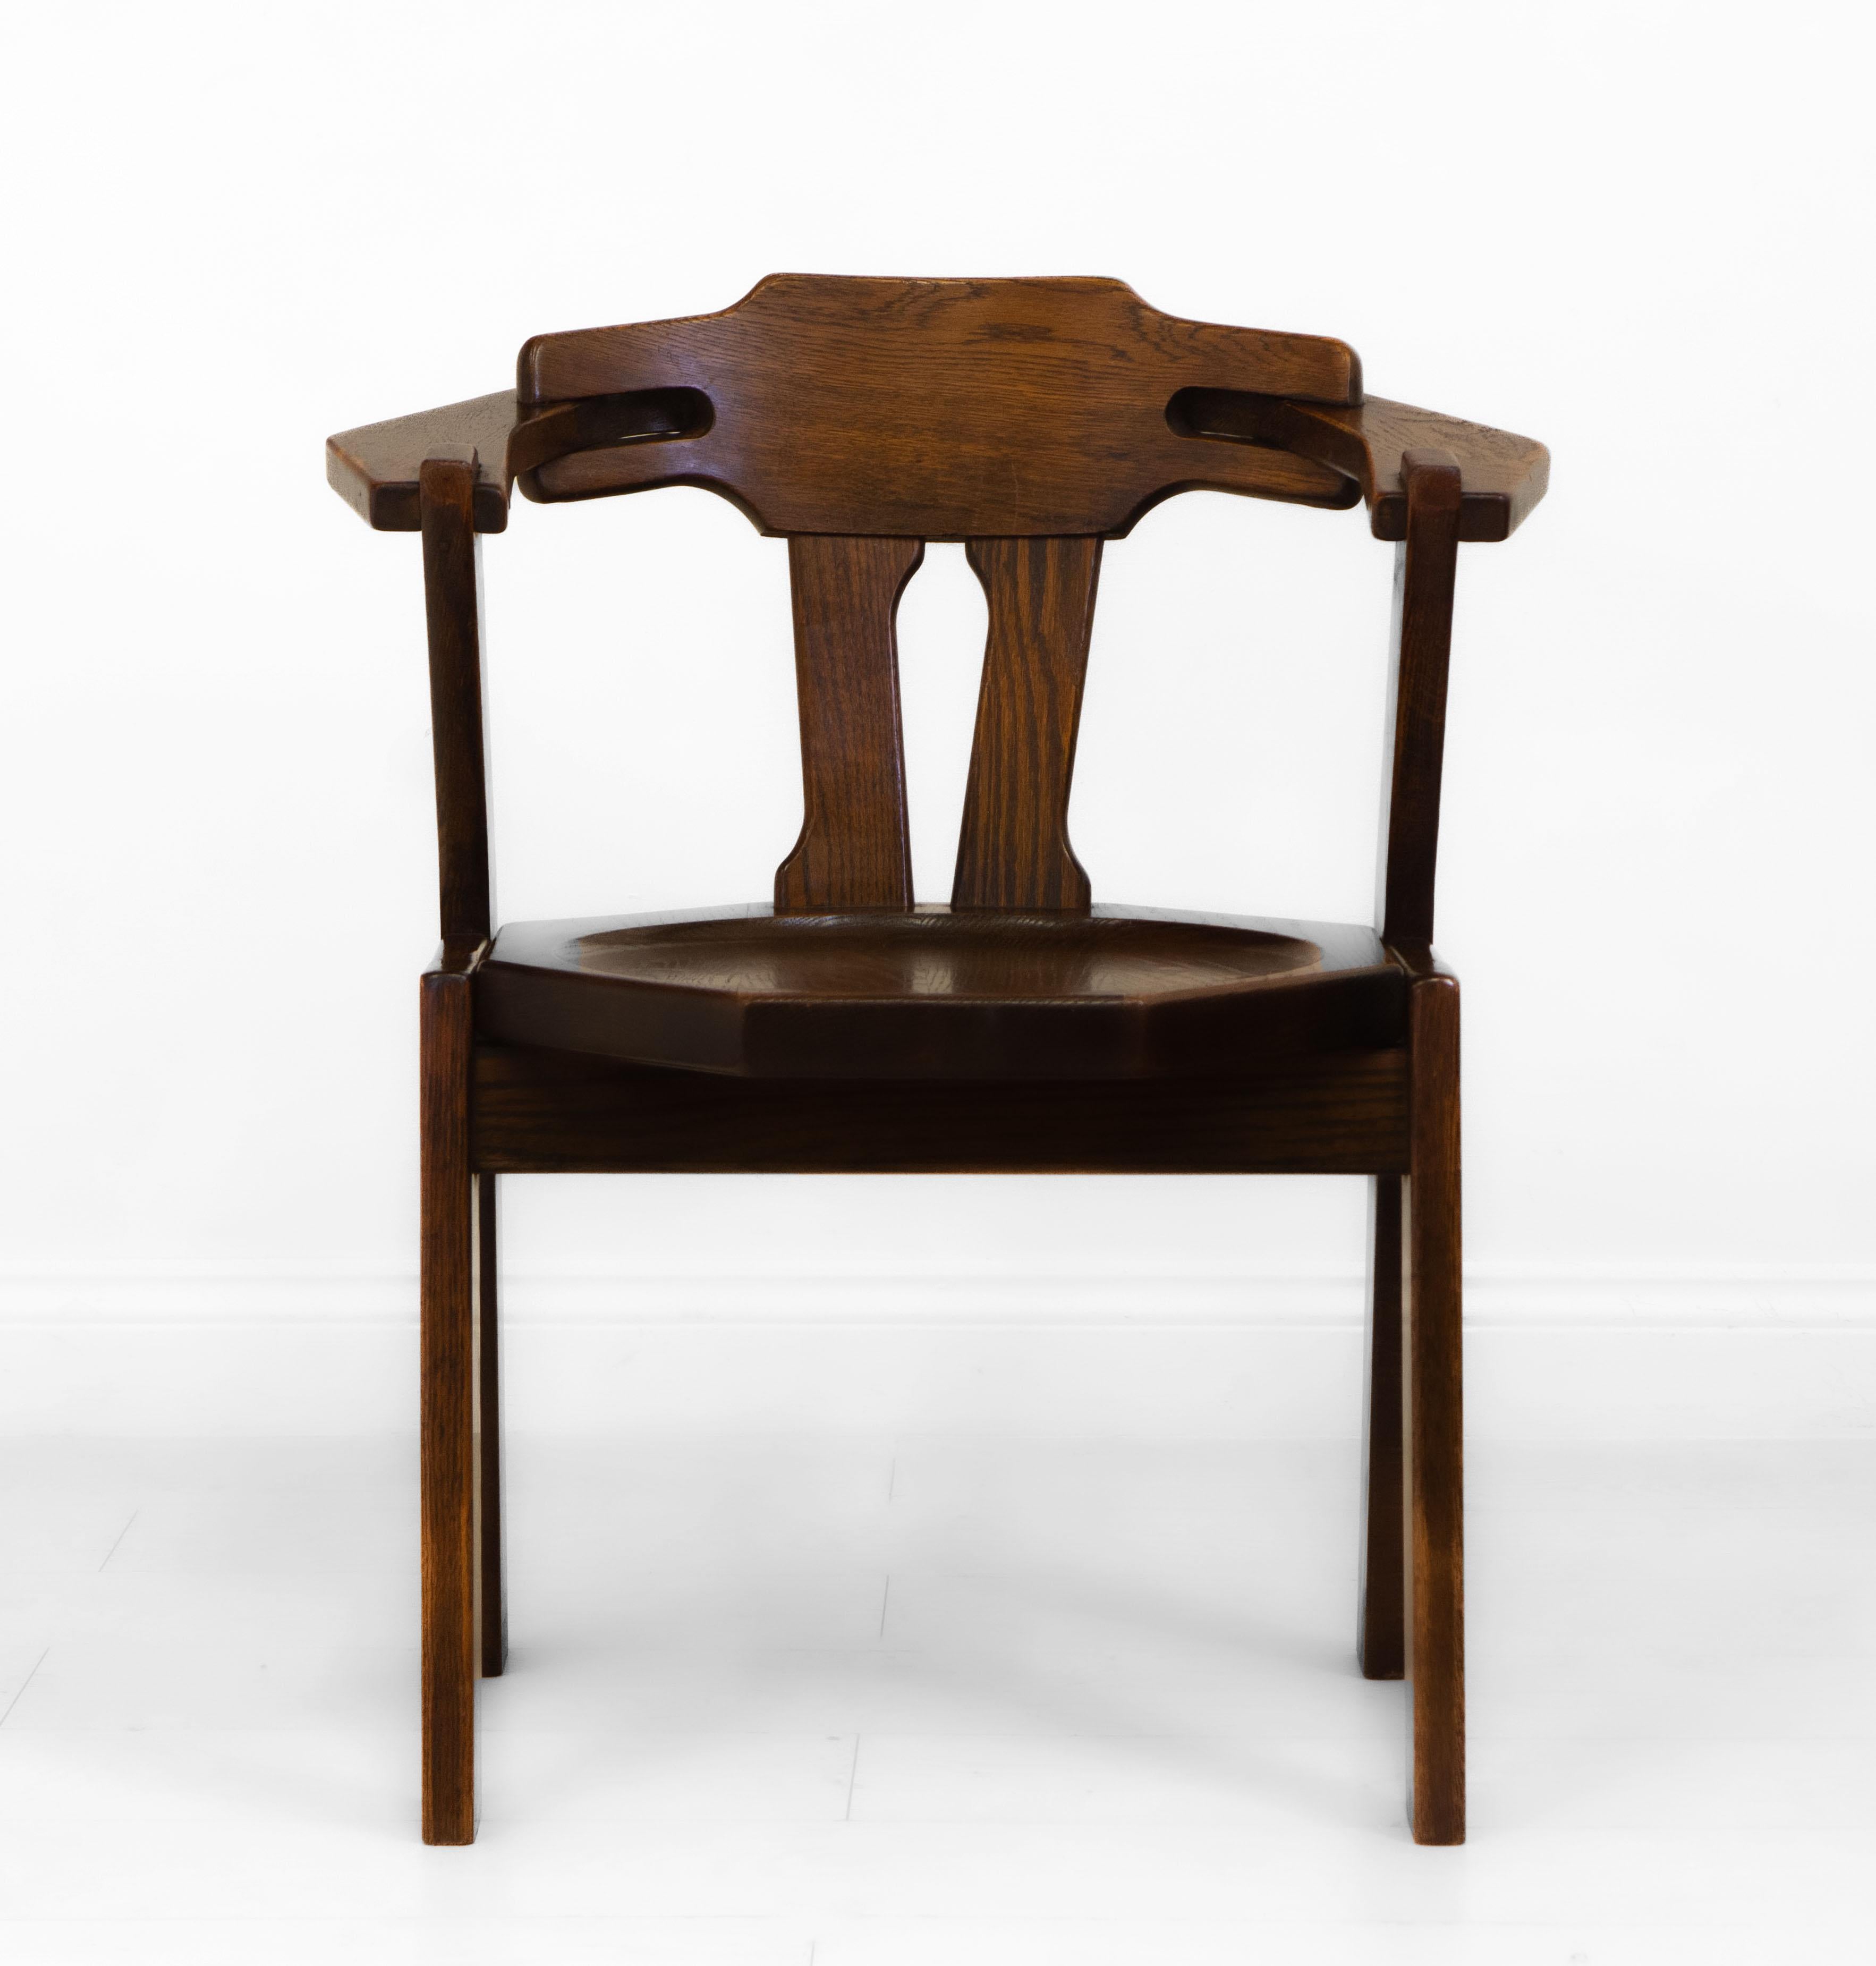 A Brutalist design oak side/desk chair. Low Countries - circa 1970.

This stylish chair is made in solid oak and in good original condition. It has been cleaned and waxed. There is some colour loss to the arms from use, a mark to the dished seat,